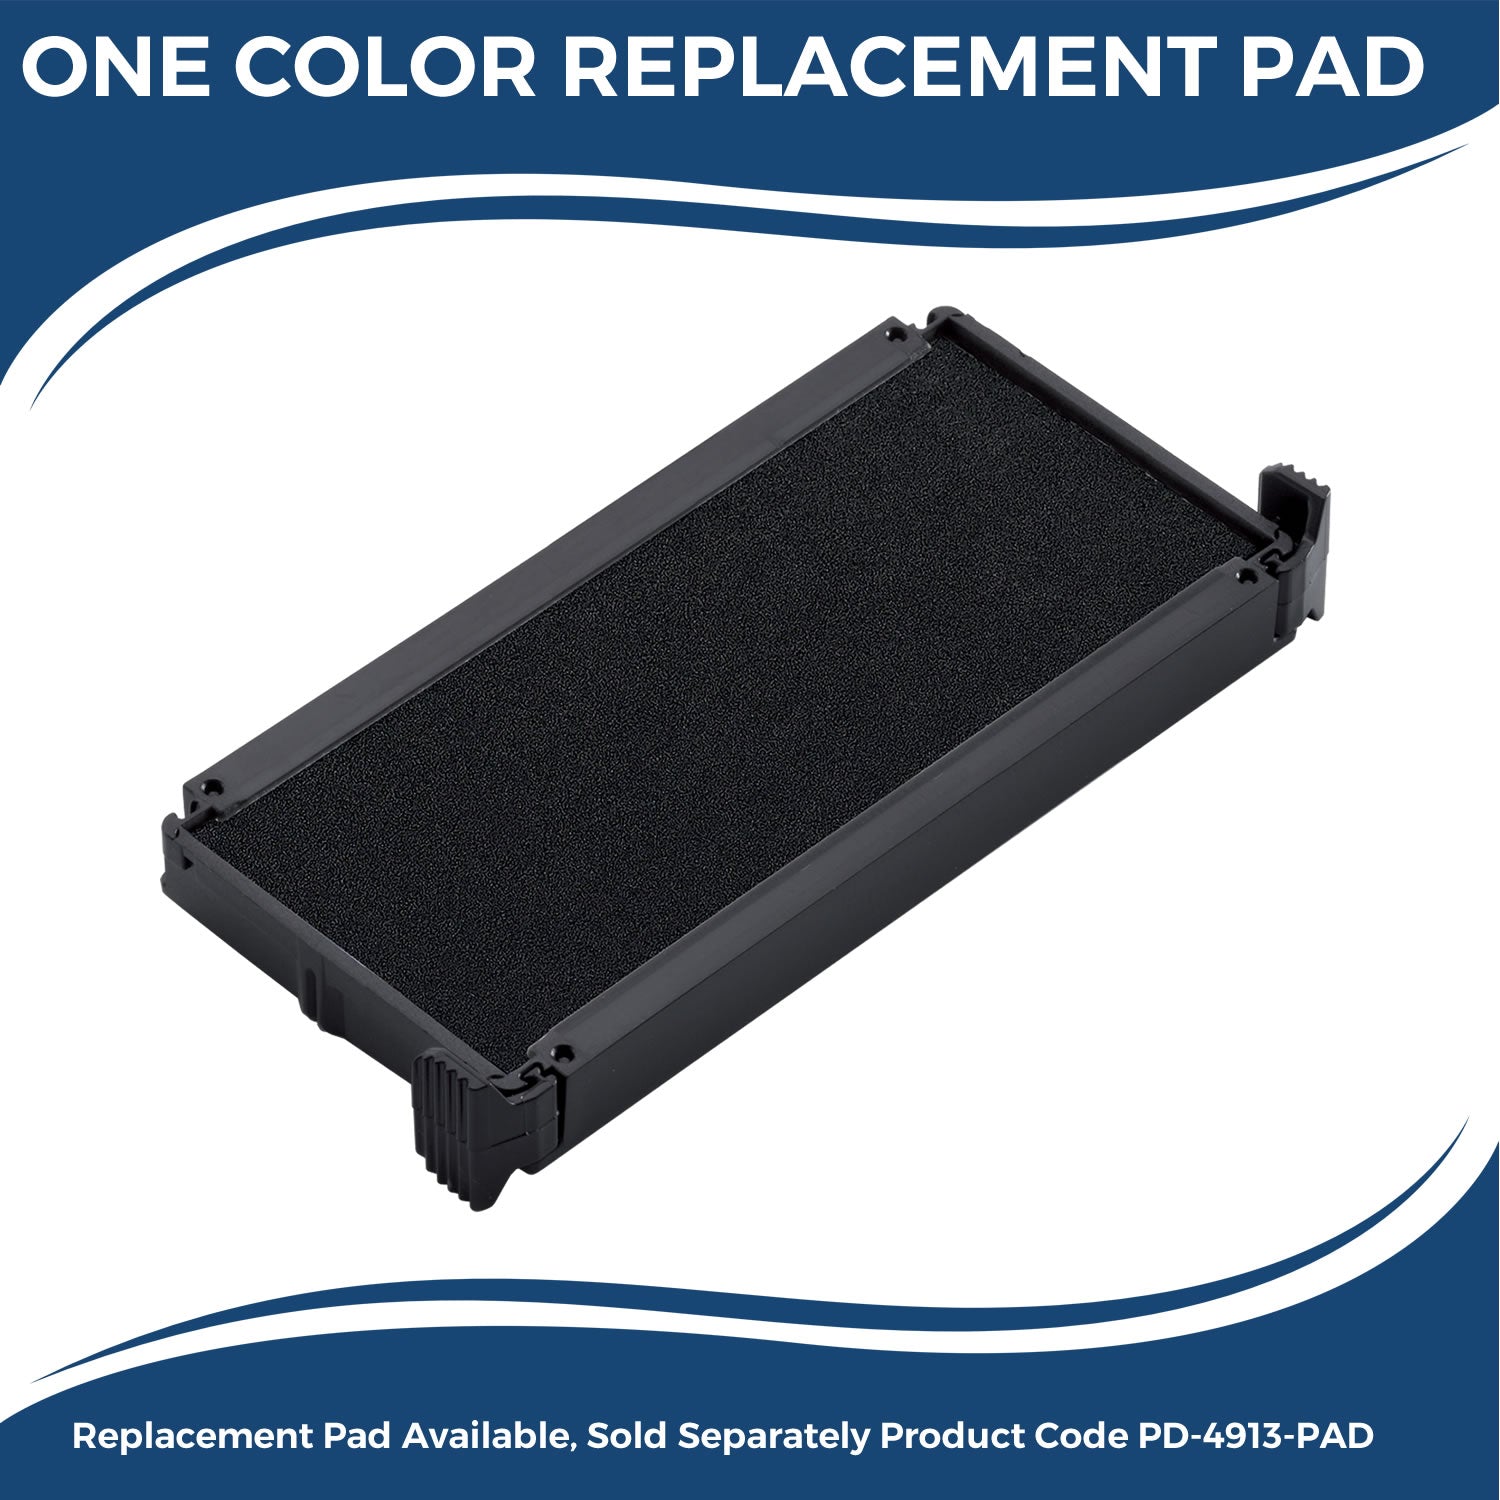 Large Self-Inking Attorneys' Copy Stamp 4881S Large Replacment Pad